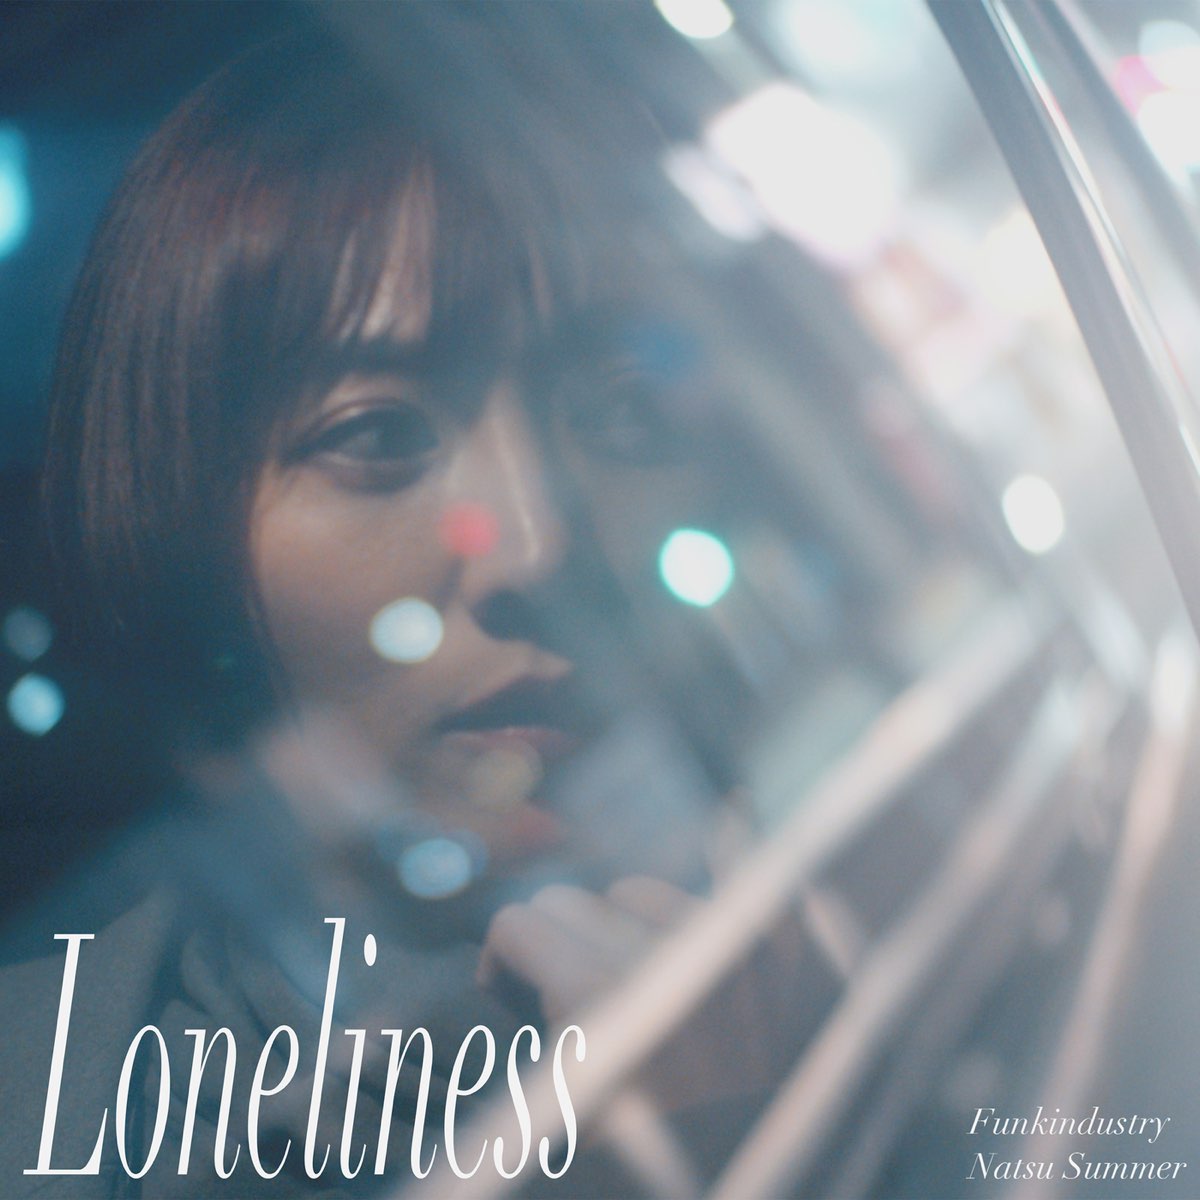 "Loneliness" with Natsu Summer